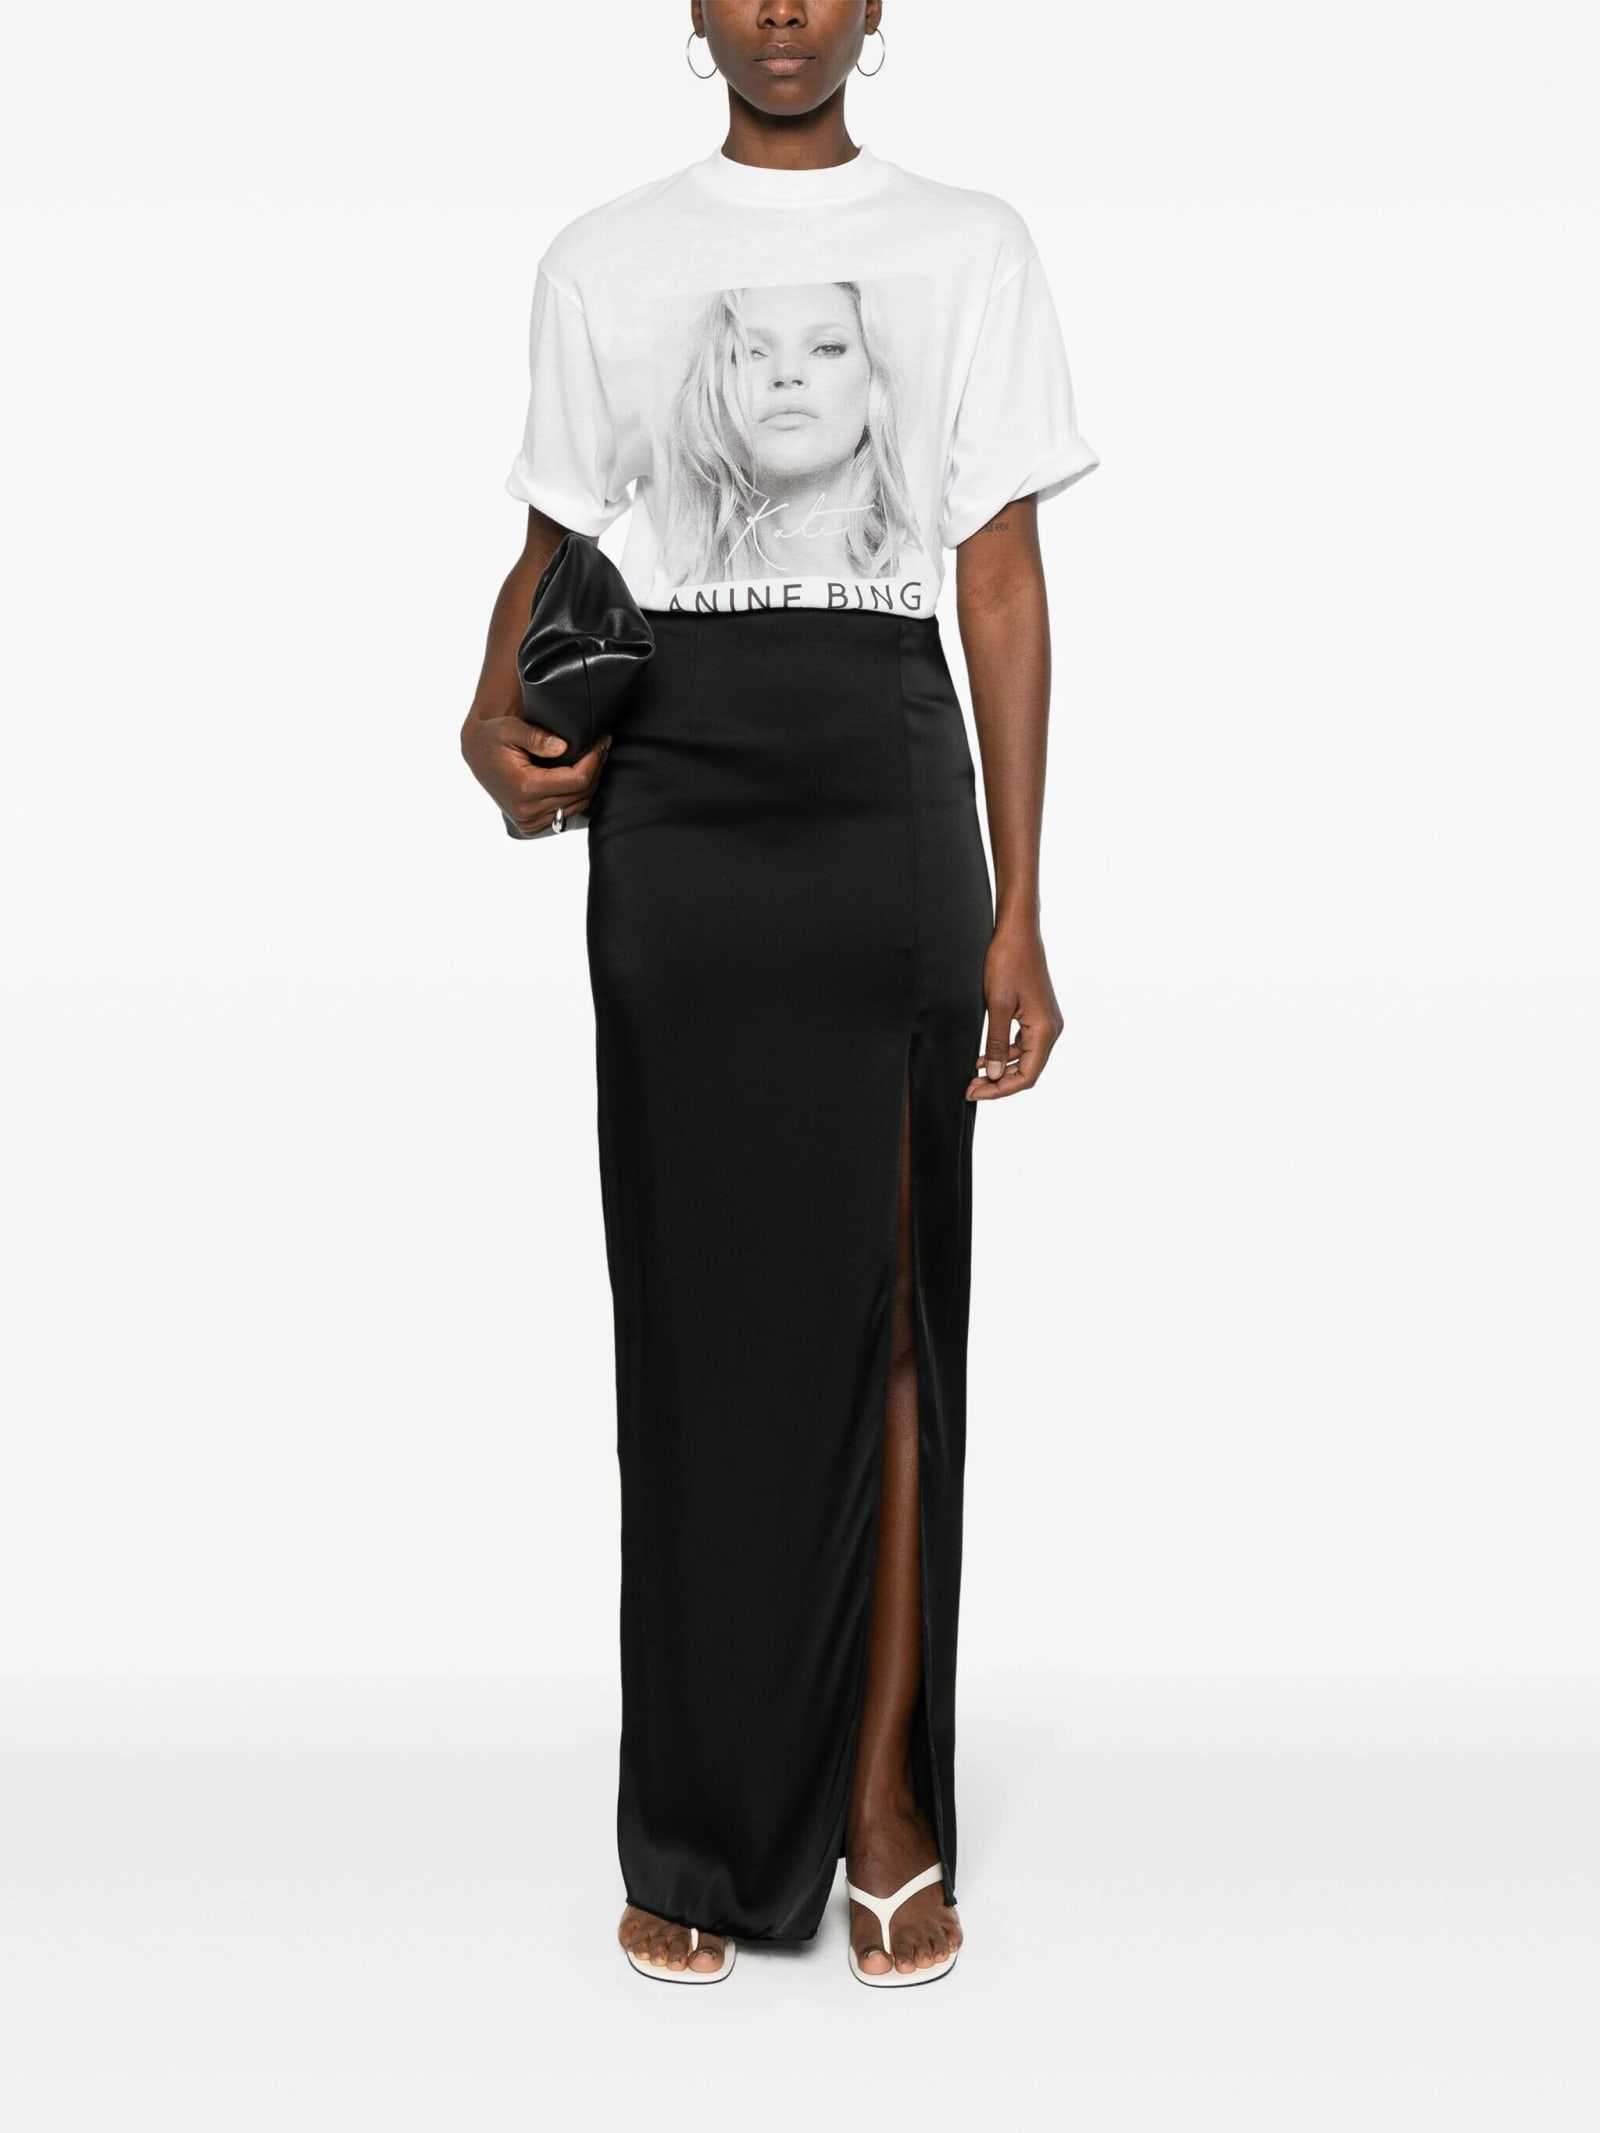 Shop Anine Bing Tee Kate Moss In A White